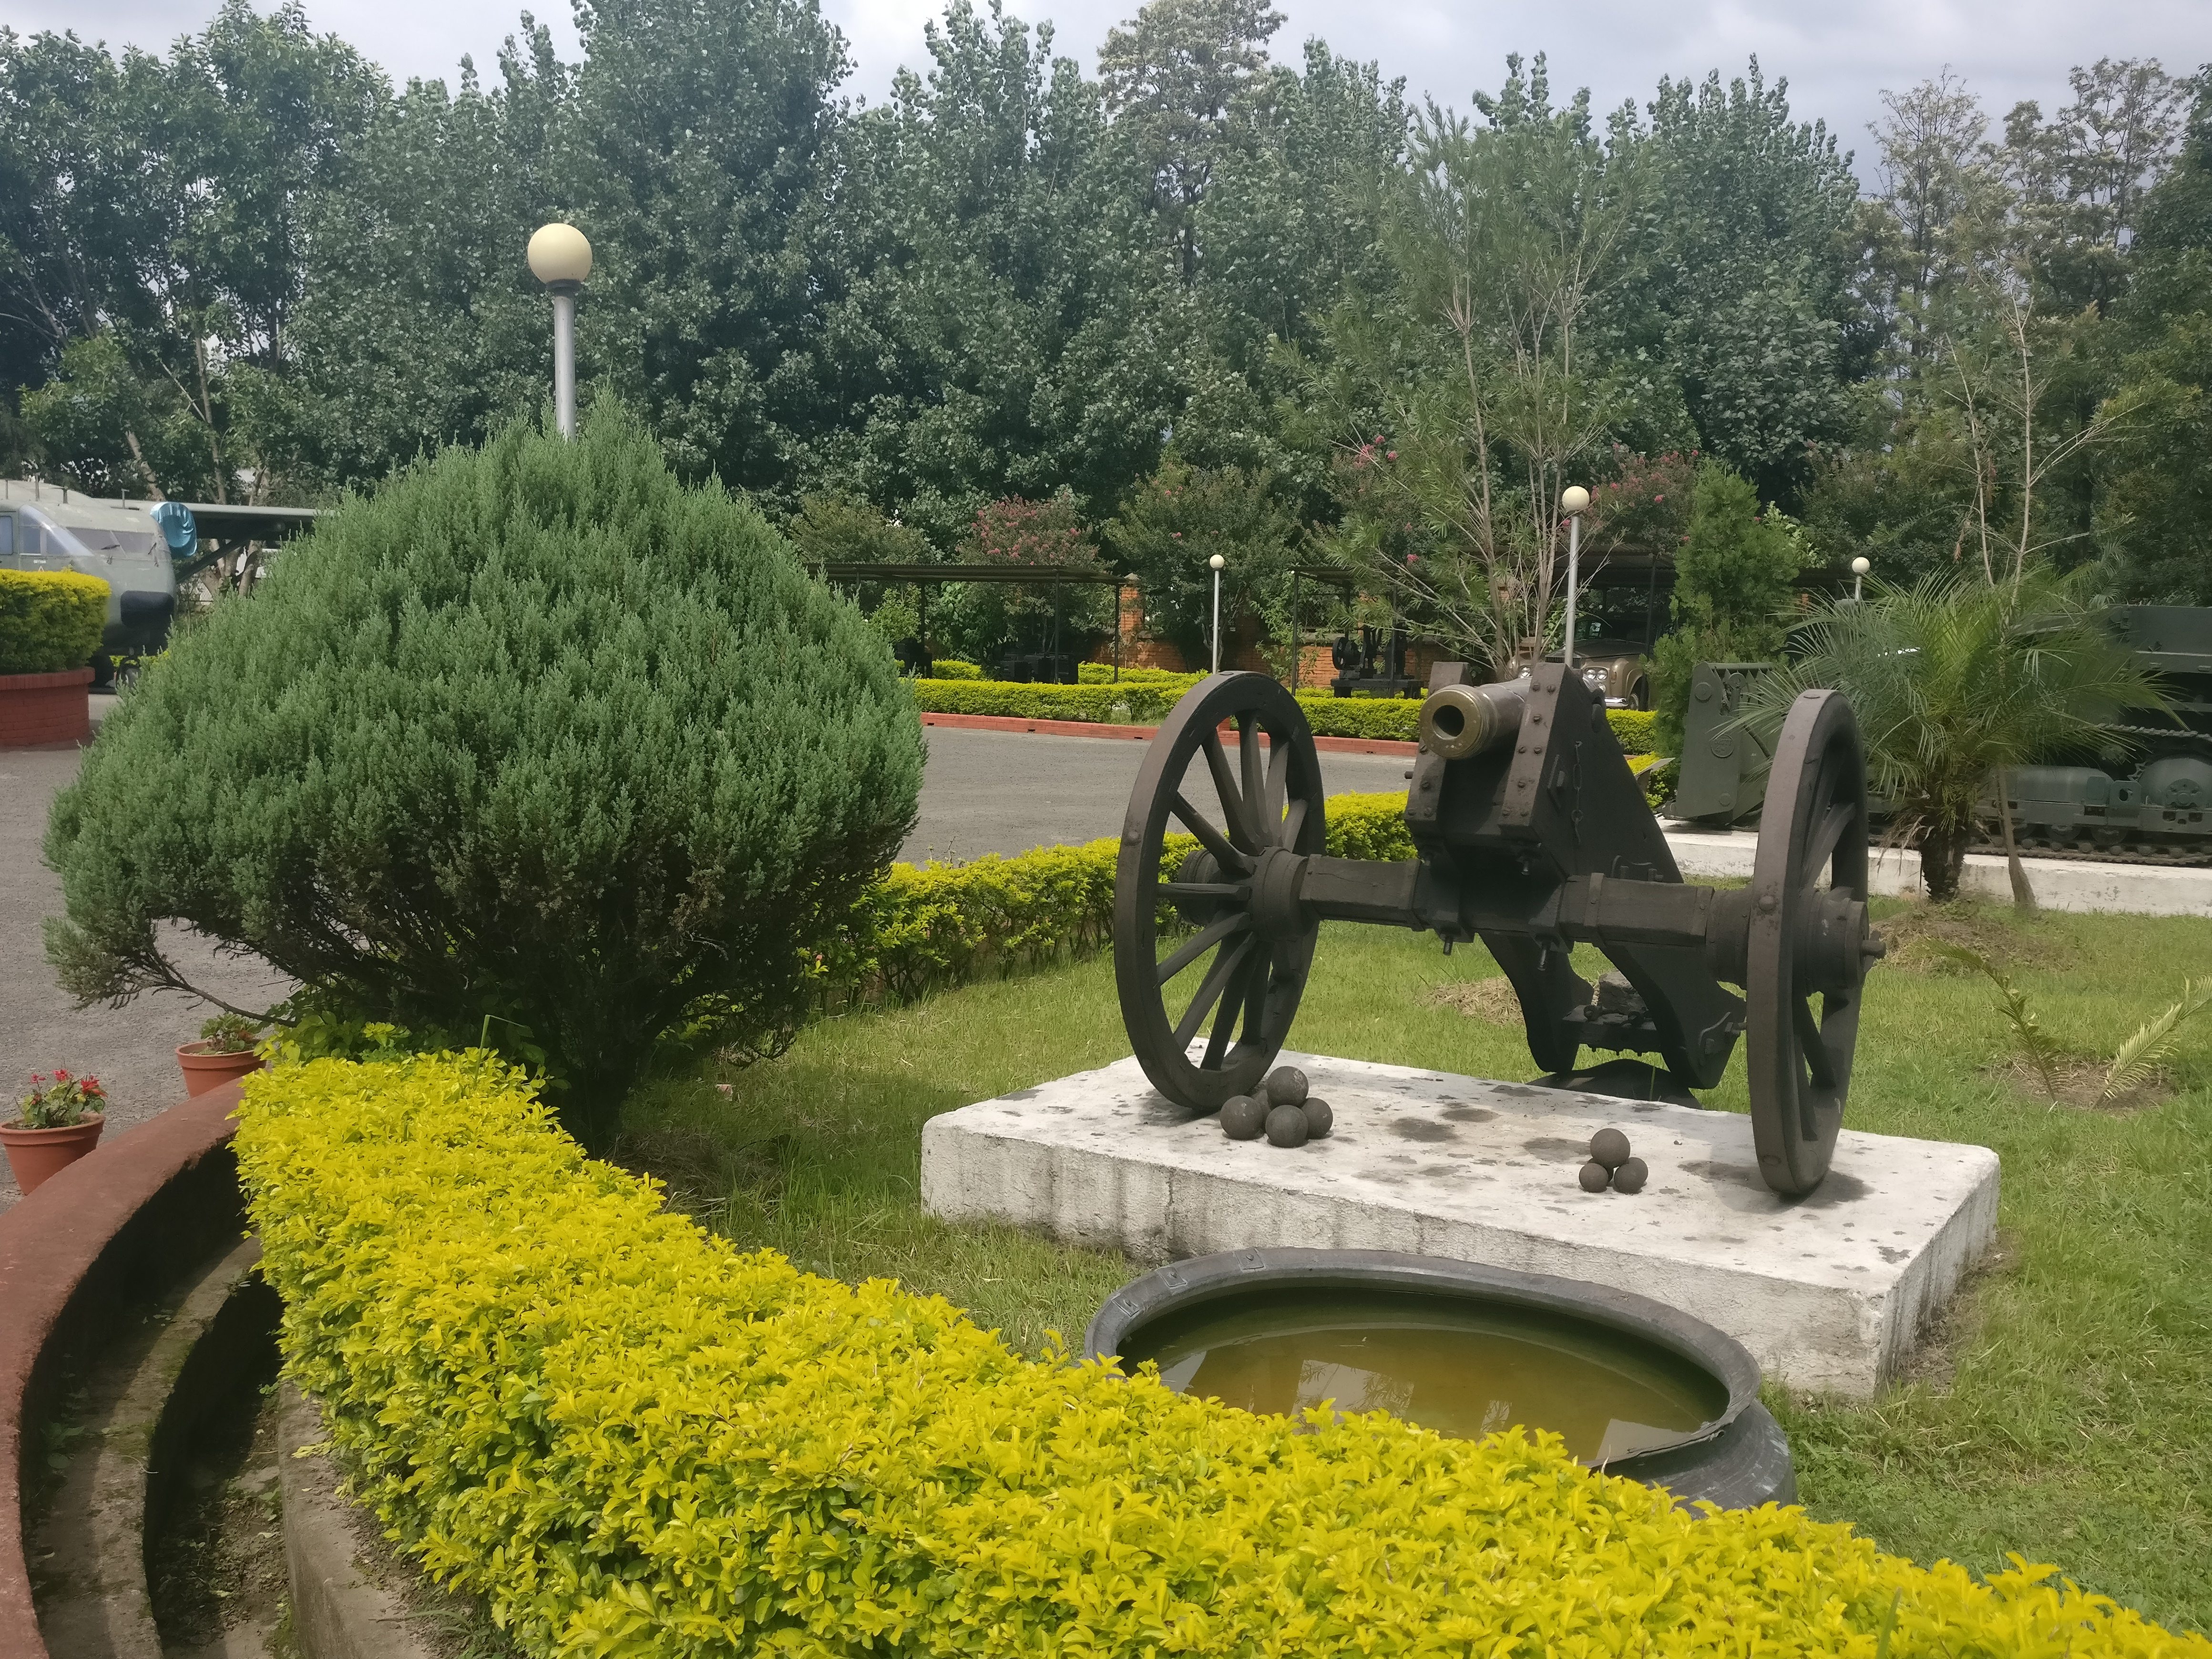 Cannon and cannonballs on display outside